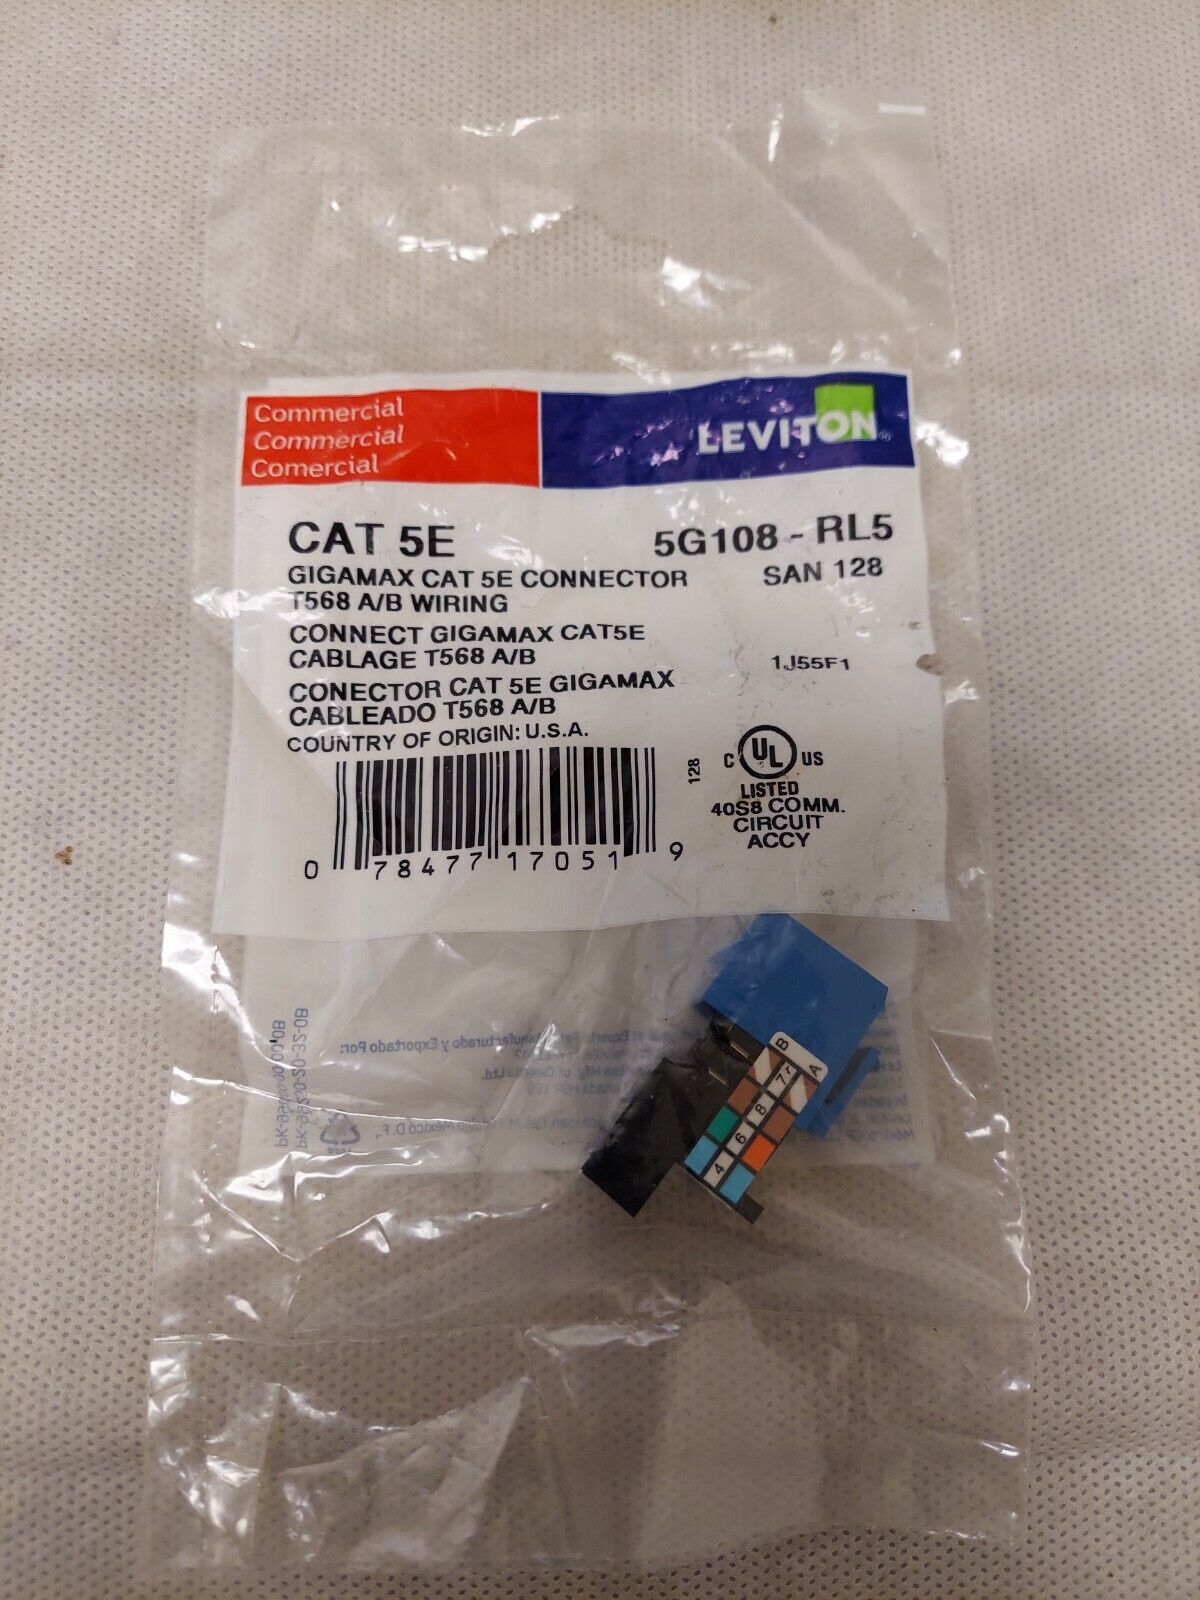 Leviton 5G108-RL5 GigaMax 5E QuickPort Connector, Cat 5E, Blue - 1 Pack New